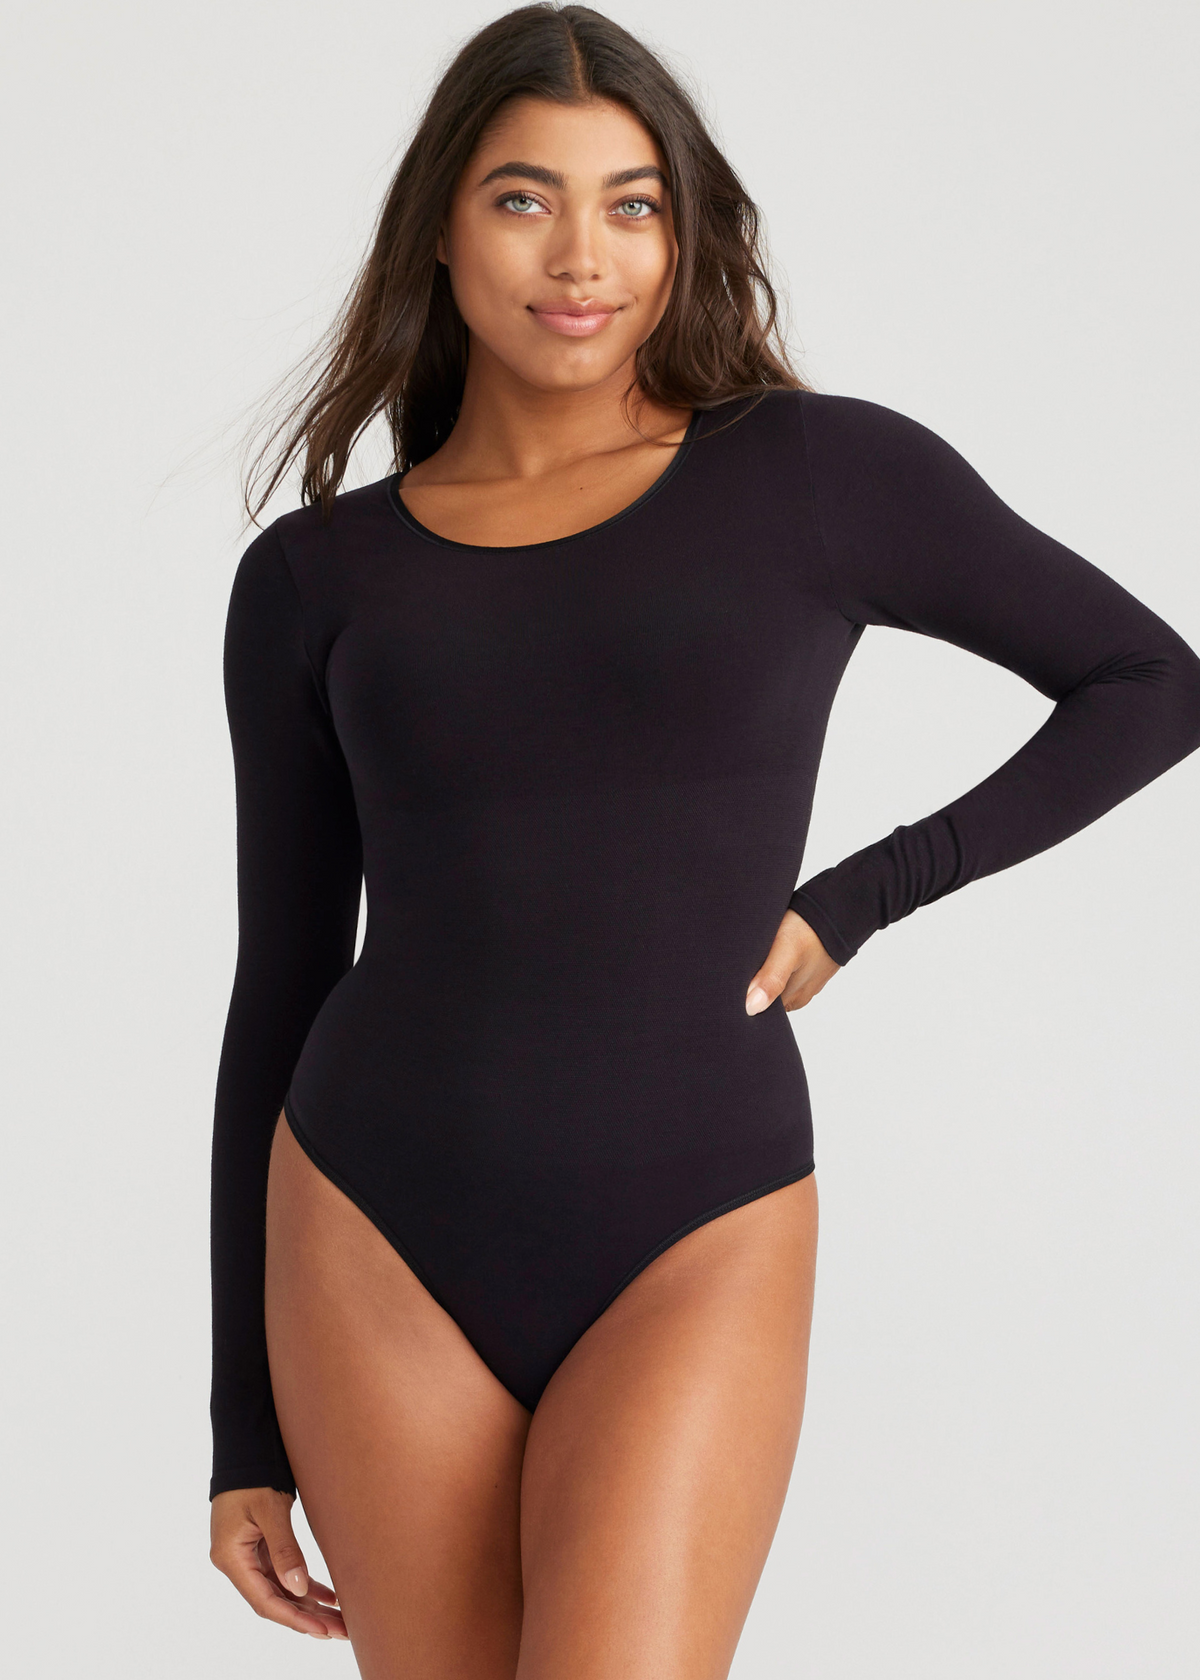 Long Sleeve Shaping Thong Bodysuit - Outlast® Seamless from Yummie in Black  - 1